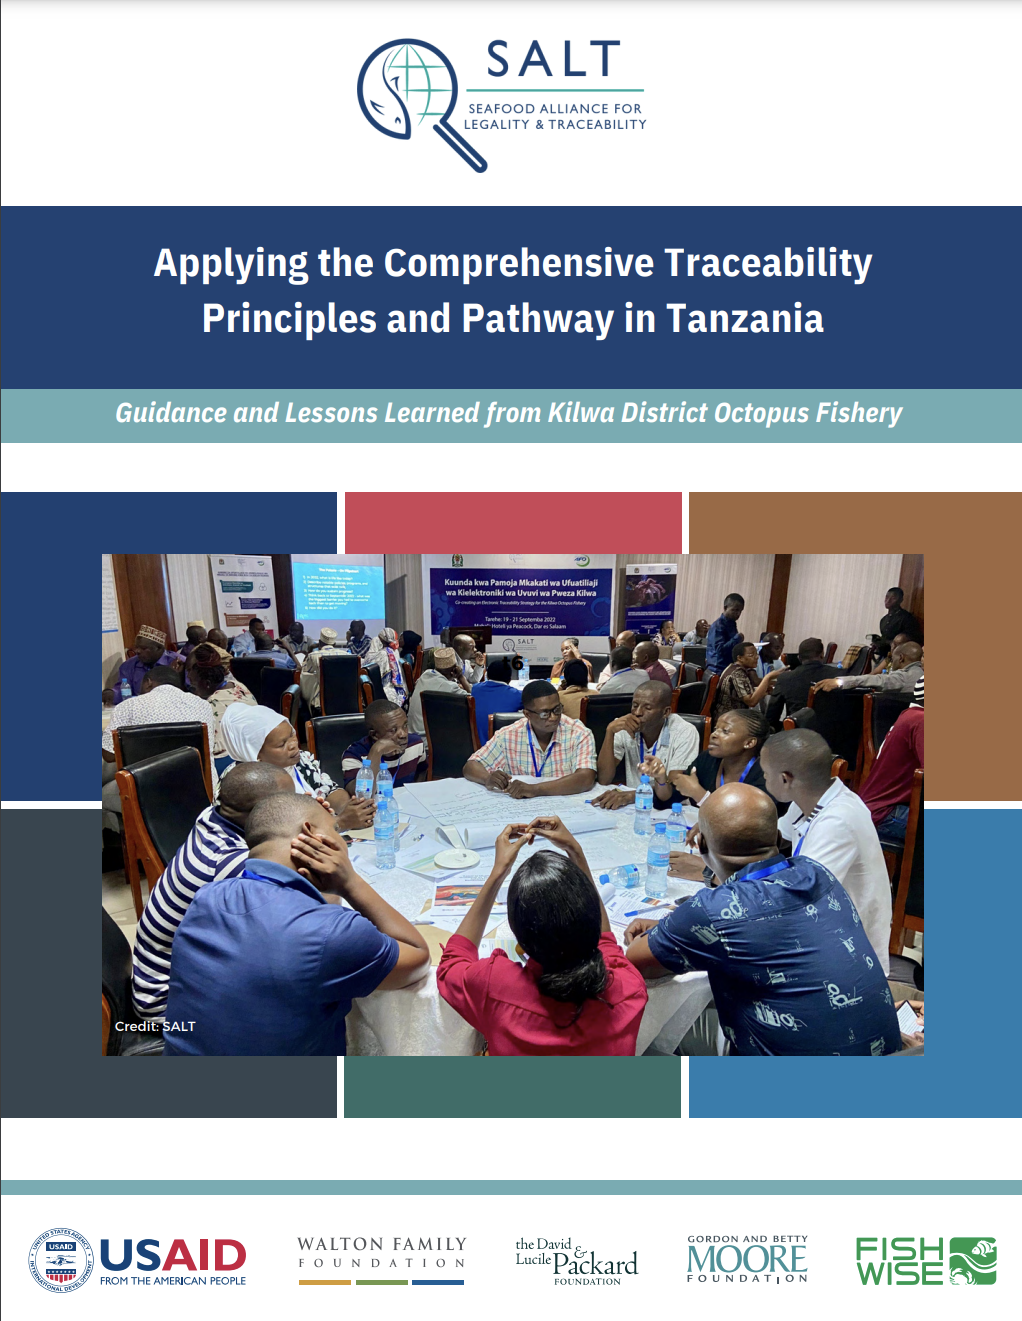 Applying the Comprehensive Traceability Principles and Pathway in Tanzania